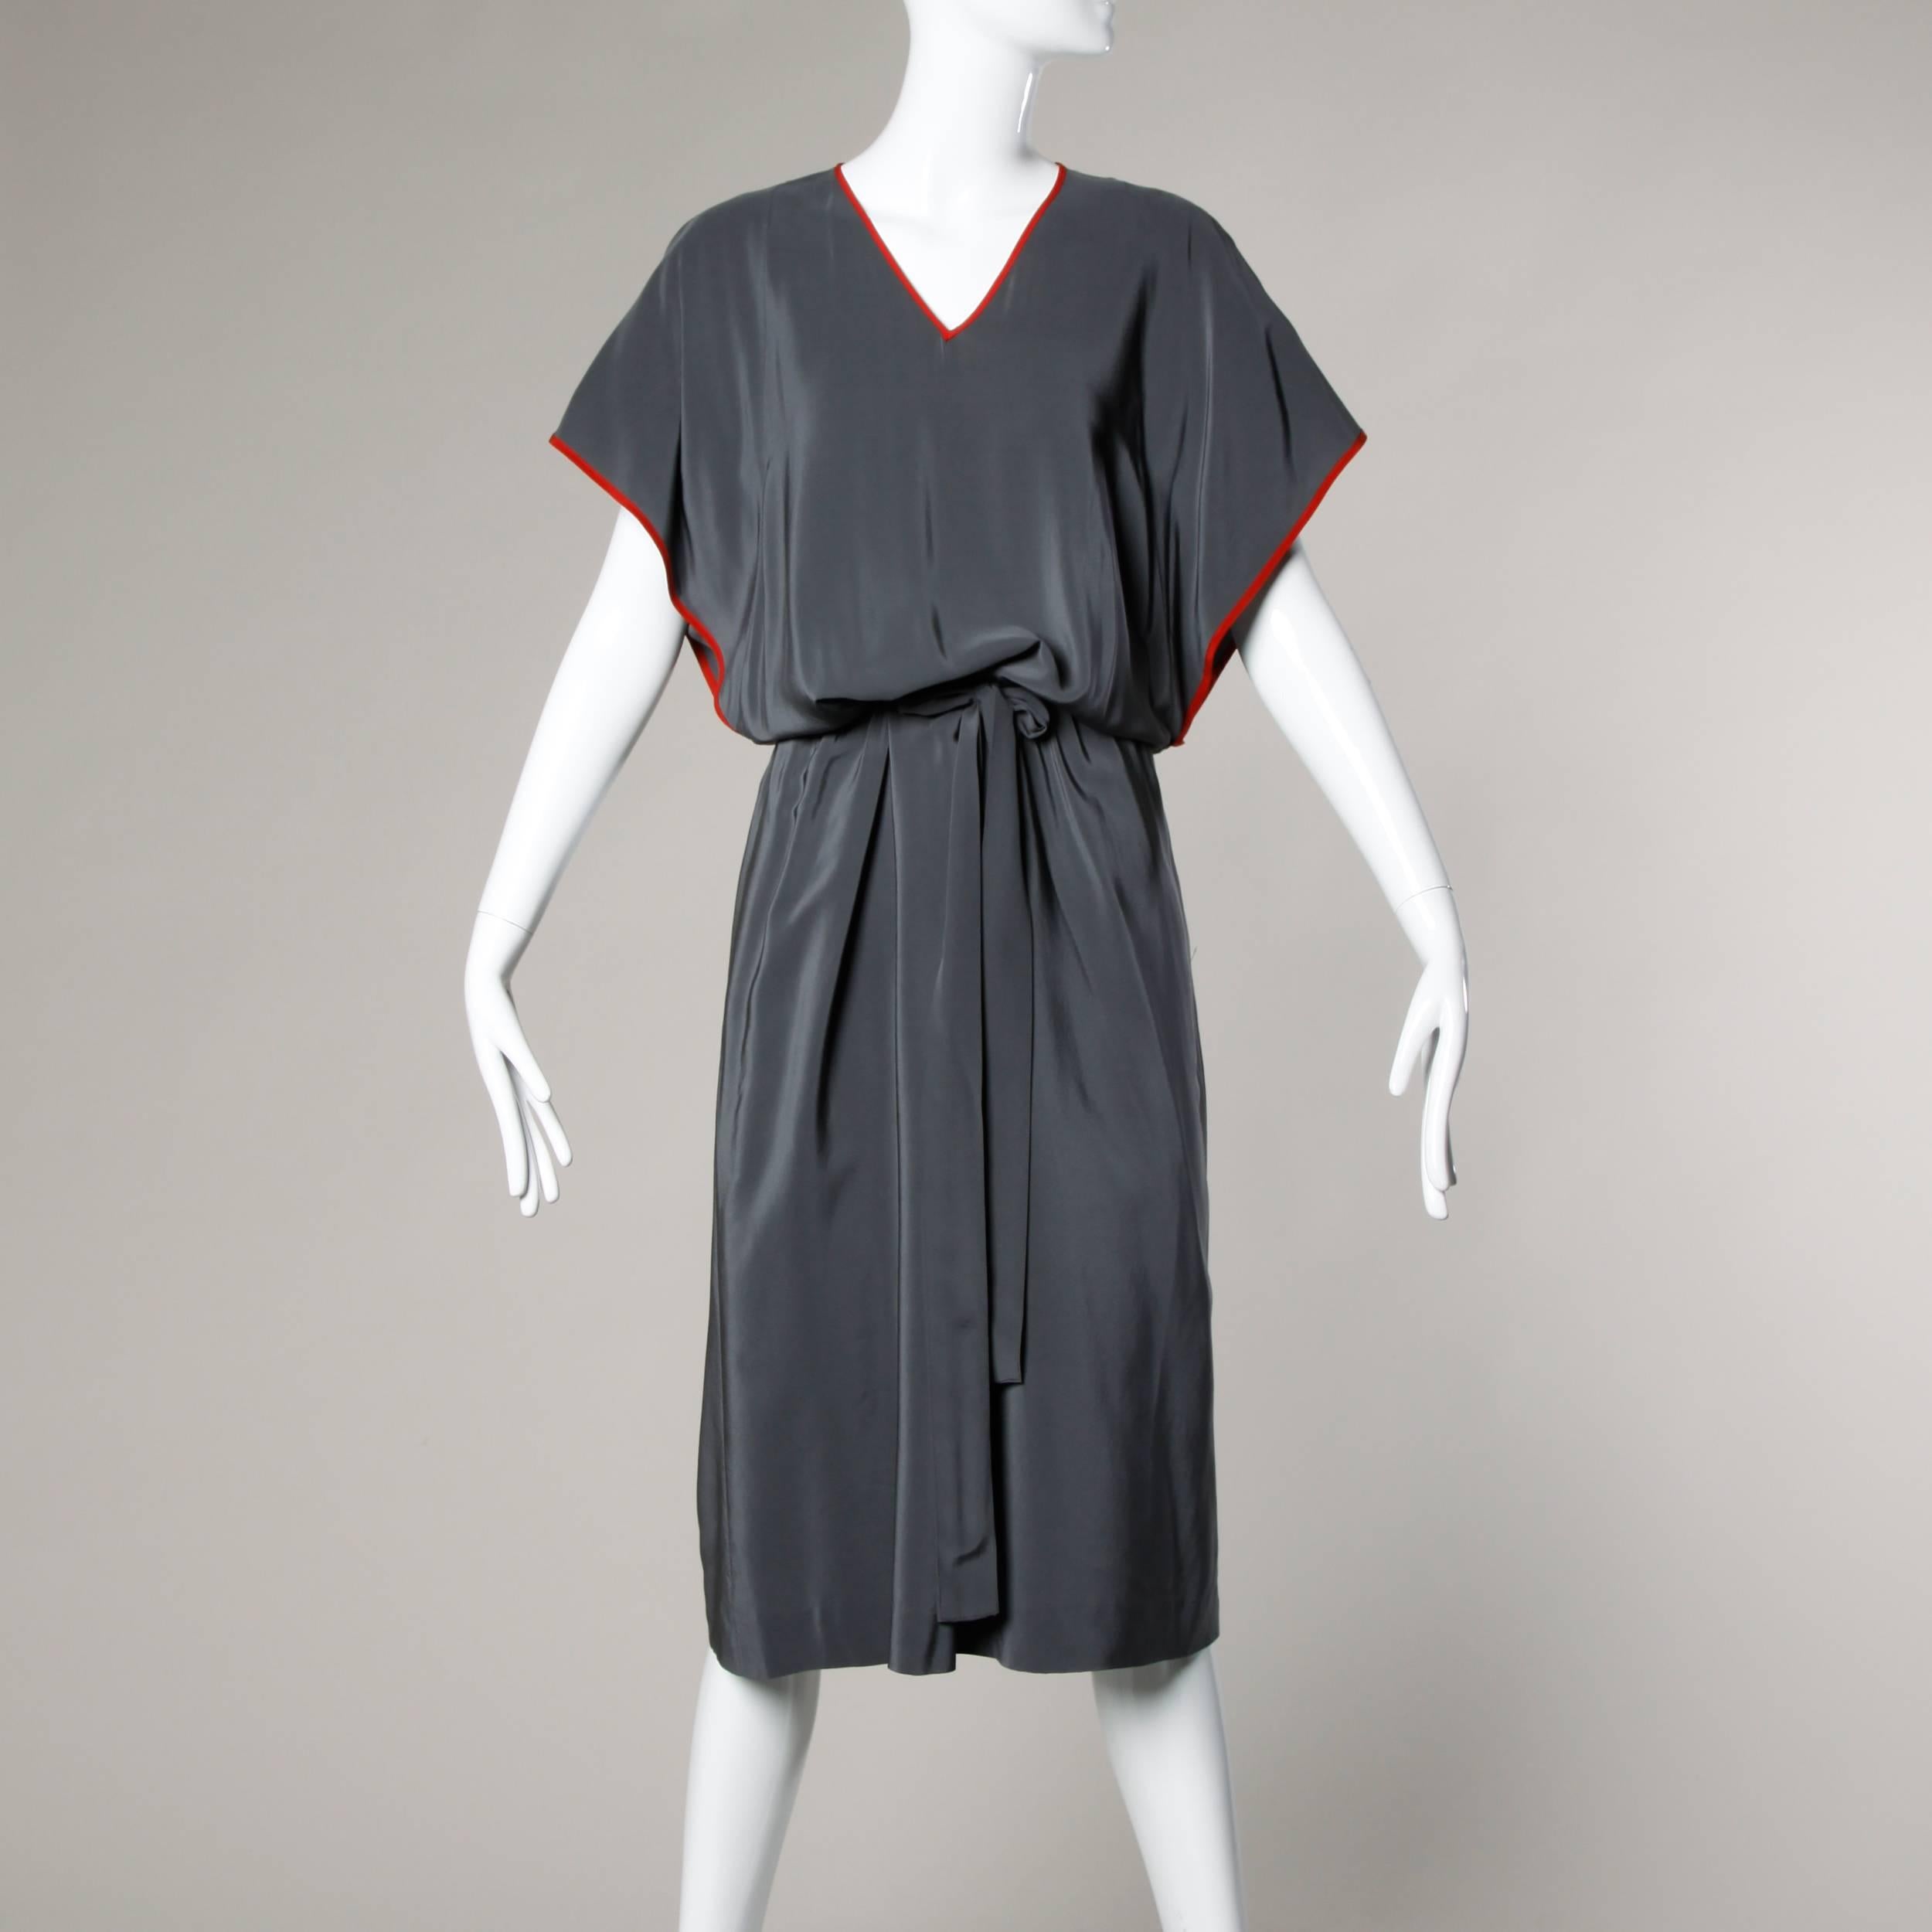 Chic avant garde dress by Guy Laroche in creamy gray silk with red silk trim. Unique draped cut with removable long sleeves and ruffled shoulders. V-neckline and matching sash.

Details:

Unlined
Side Pockets
Matching Sash
Marked Size: F 42/